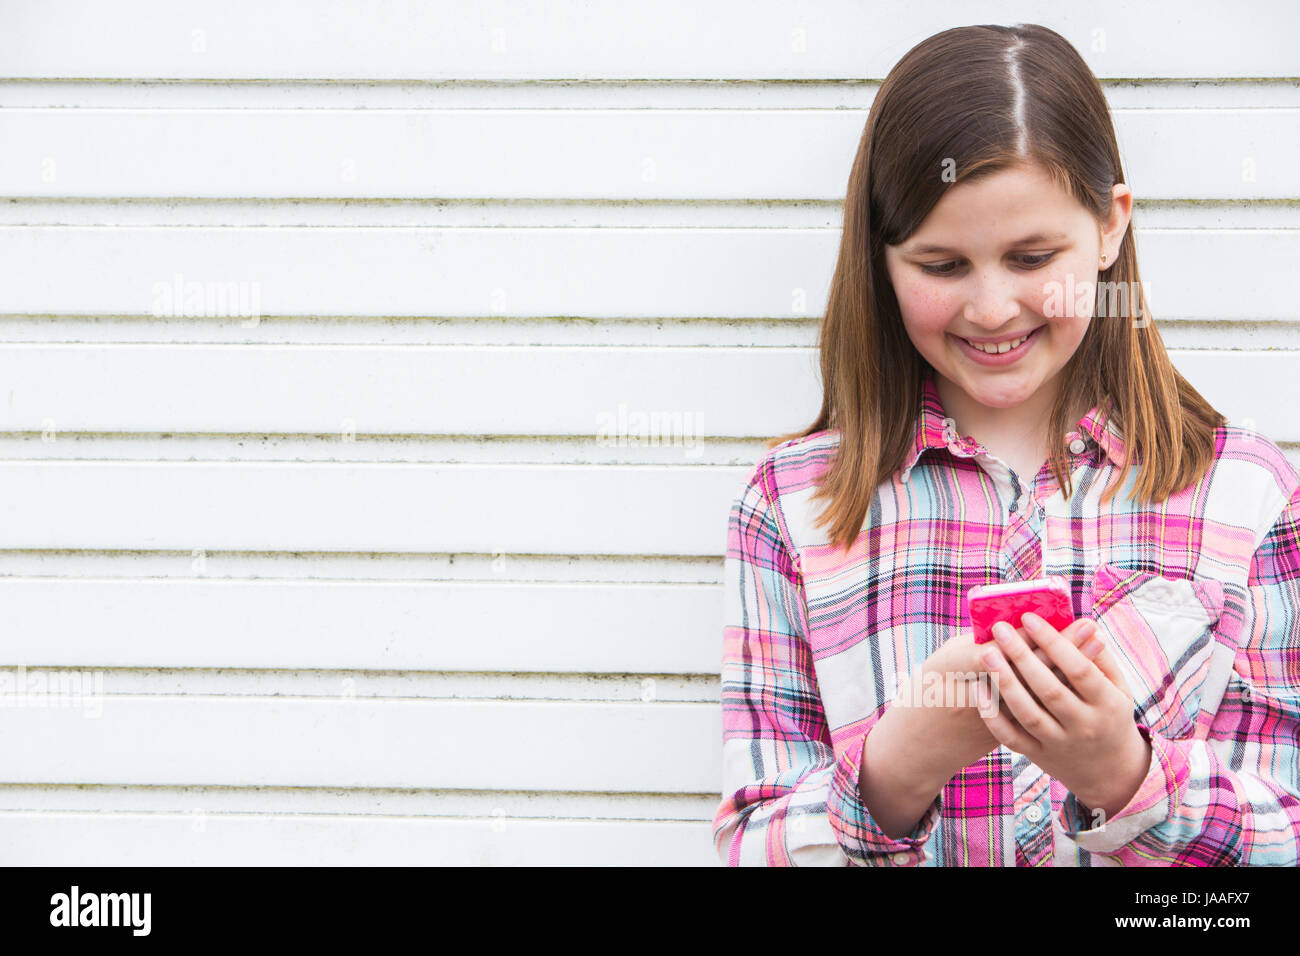 Pre Teen Girl Texting On Mobile Phone In Urban Setting Stock Photo